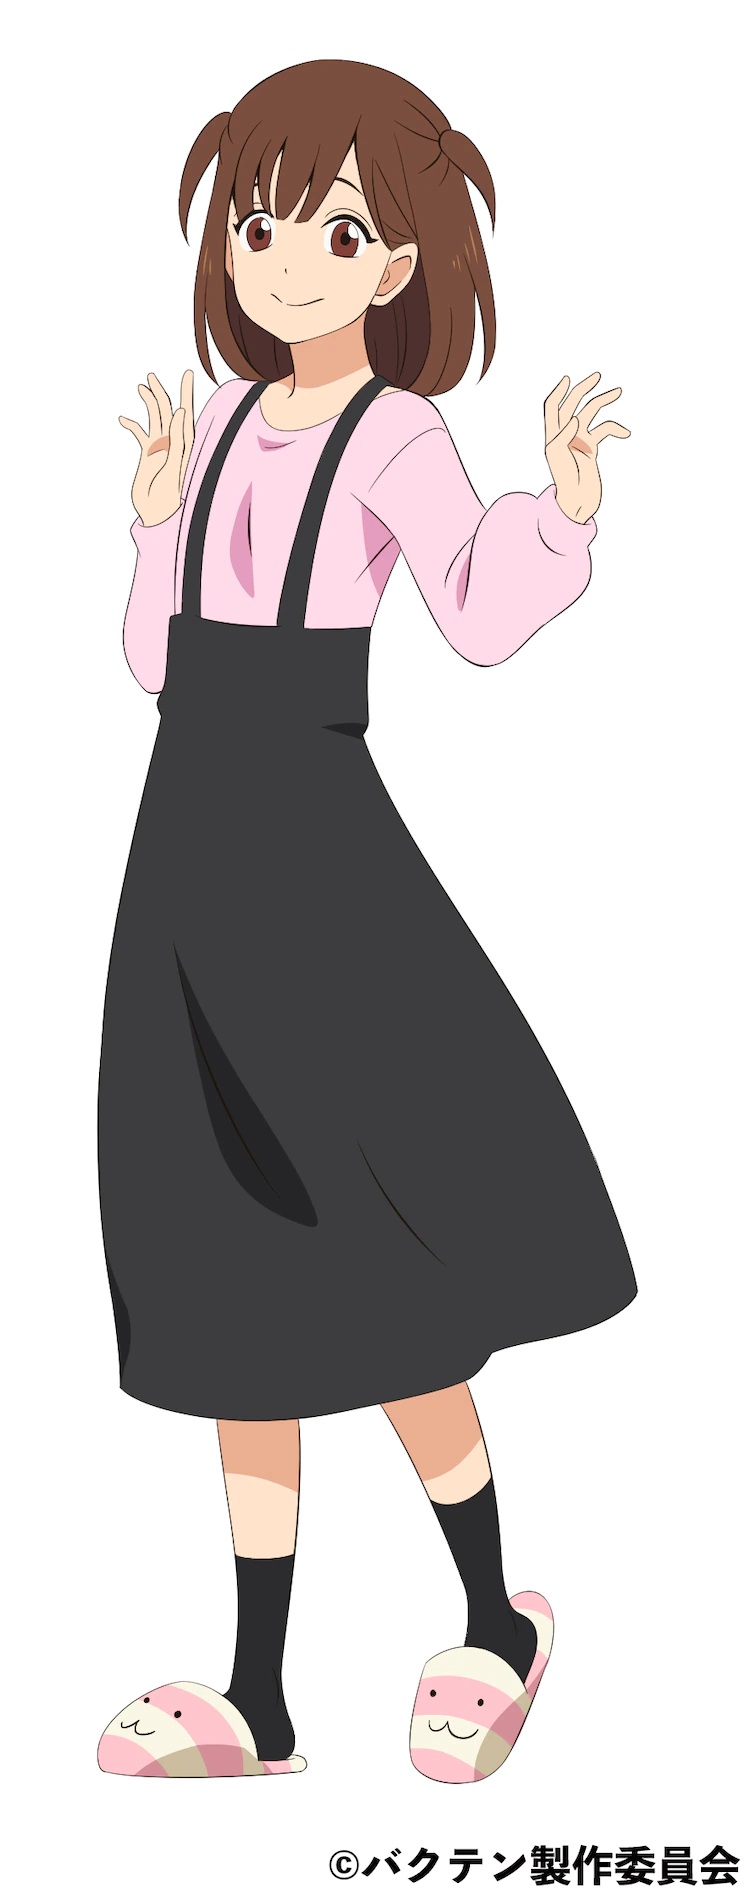 A character setting of Ayumi Futaba from the upcoming Bakuten!! TV anime. Ayumi is a second year middle school student with brown hair styled in pigtails and brown eyes. She wears a pink blouse, a black skirt, black socks, and fuzzy animal slippers.